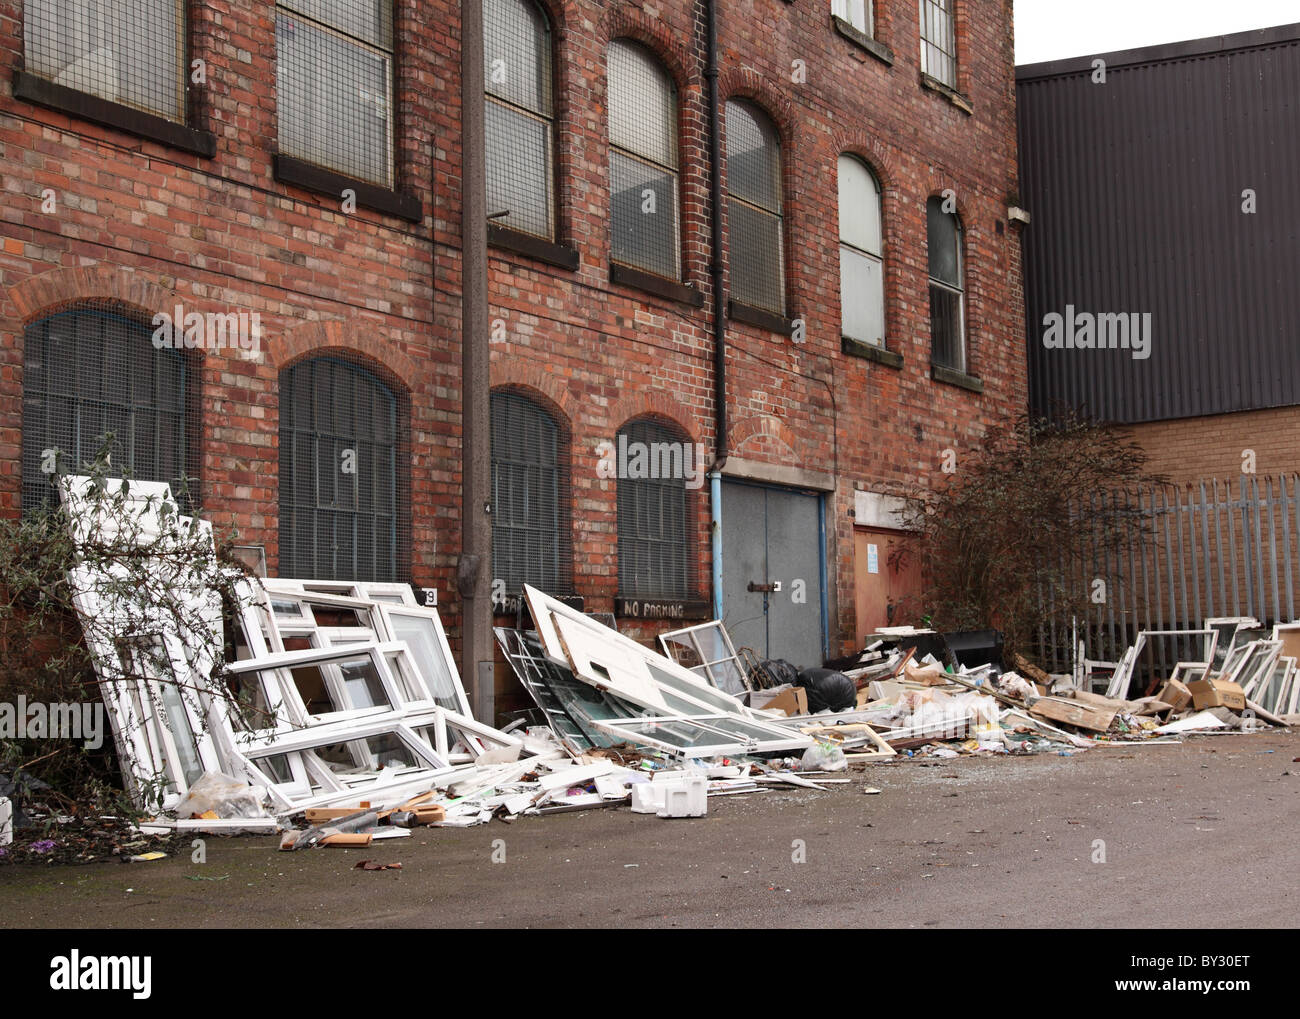 Fly tipping in a U.K. city. Stock Photo